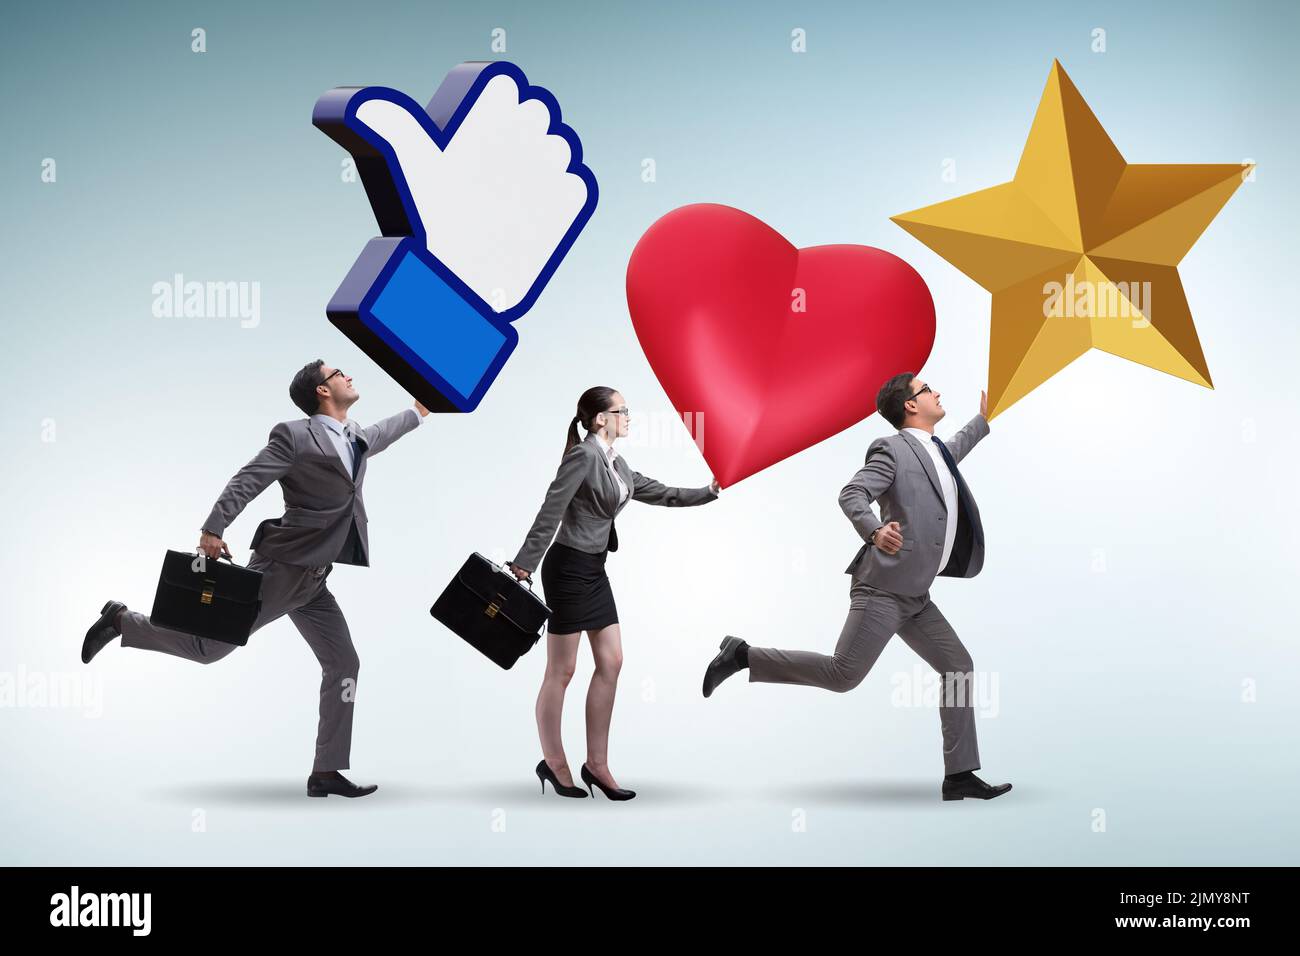 Business people in social engagement concept Stock Photo